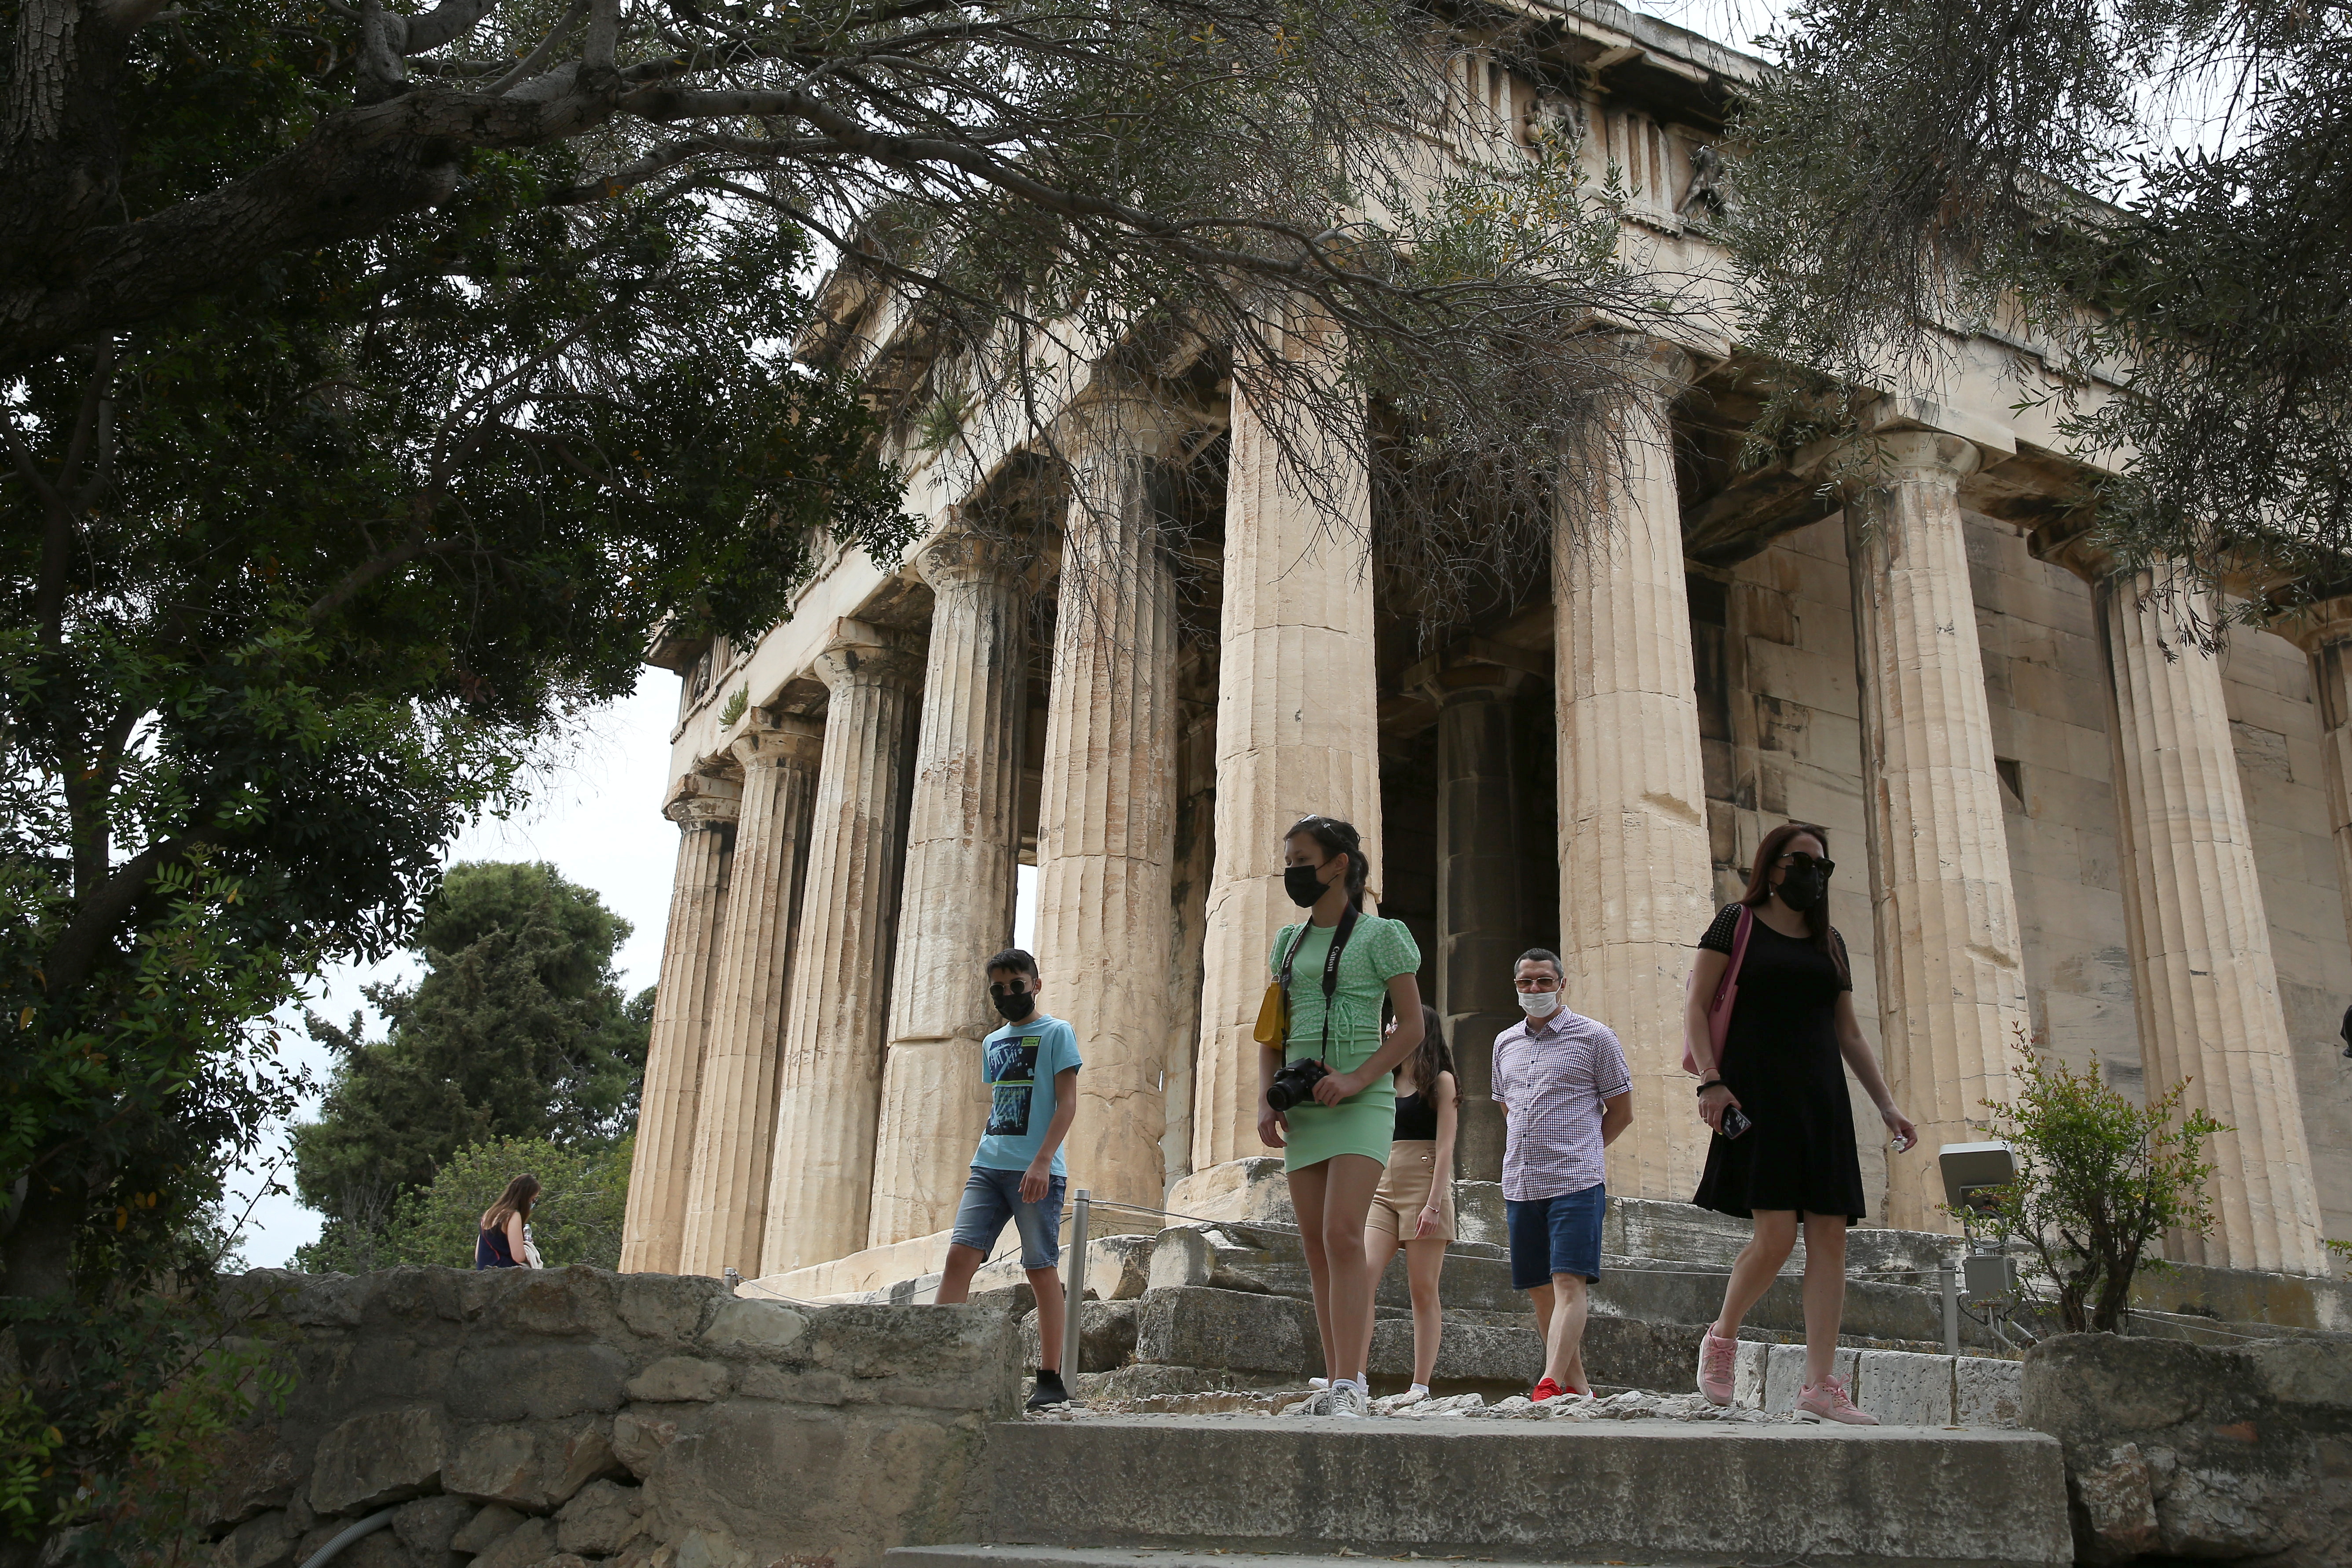 Tourists visit the ancient temple of Hephaestus, as the country's tourist season officially opens, in Athens, Greece on May 15, 2021. REUTERS / Costas Baltas